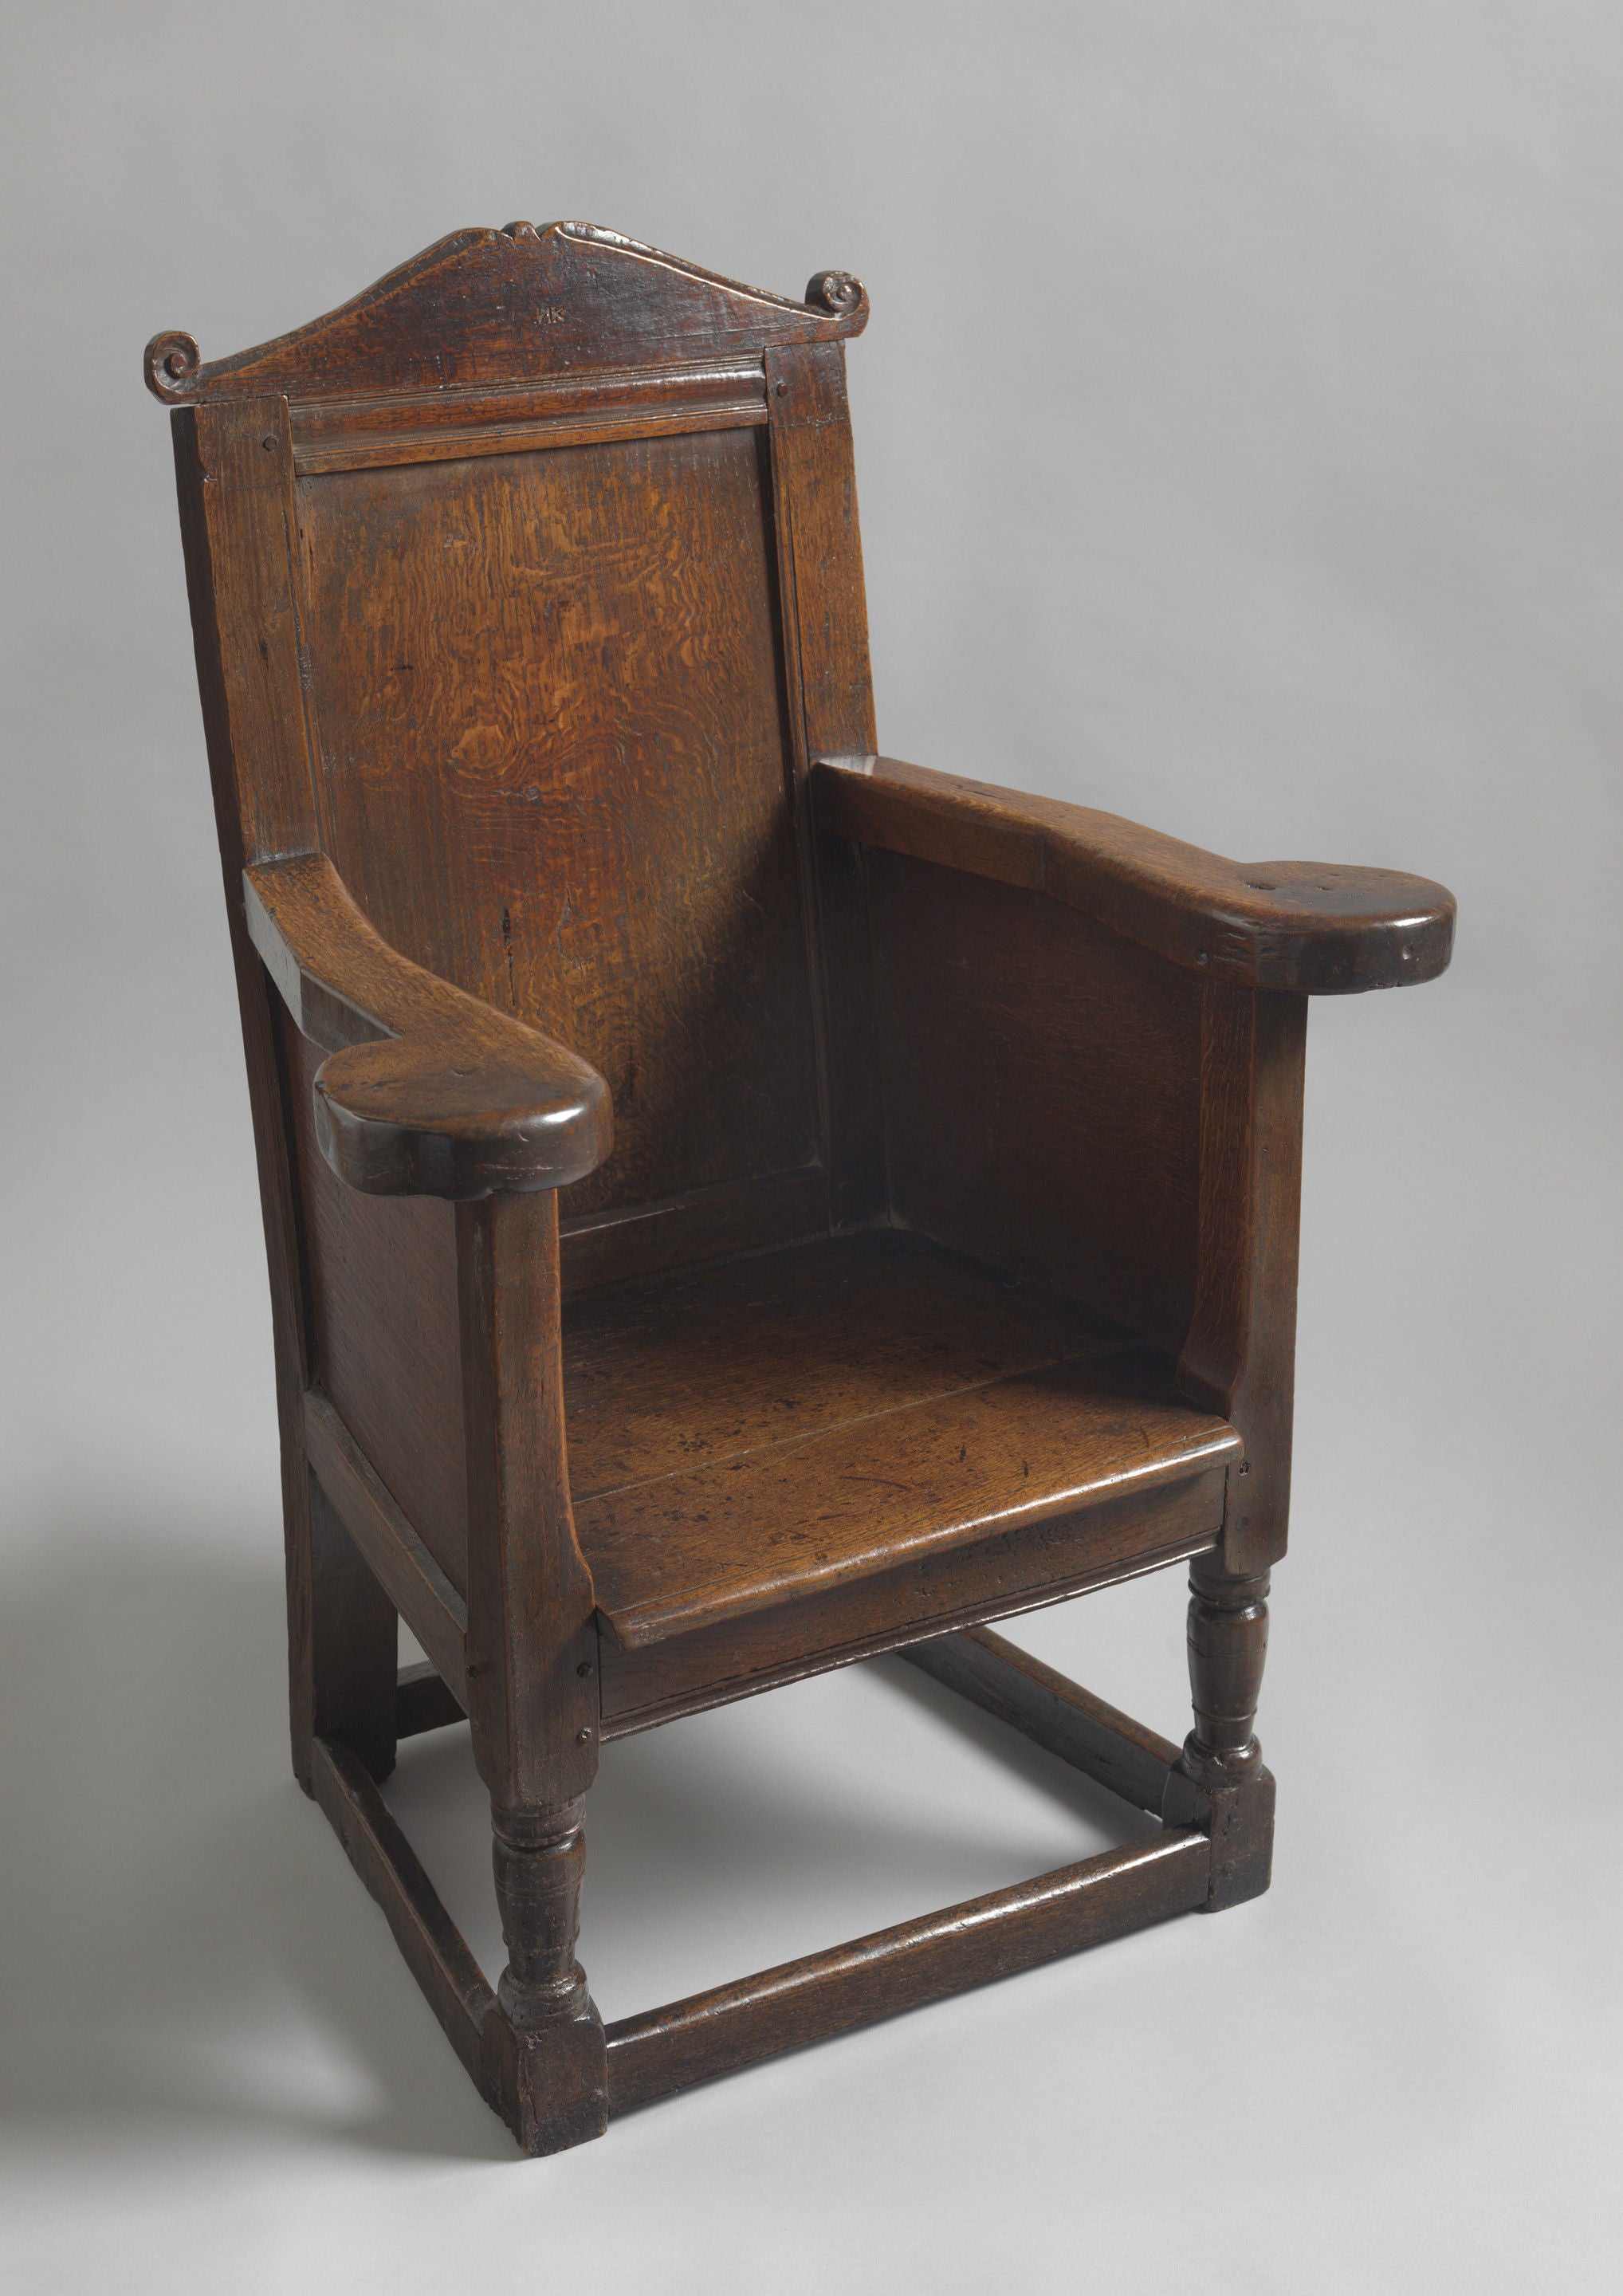 Significant Puritan Chair